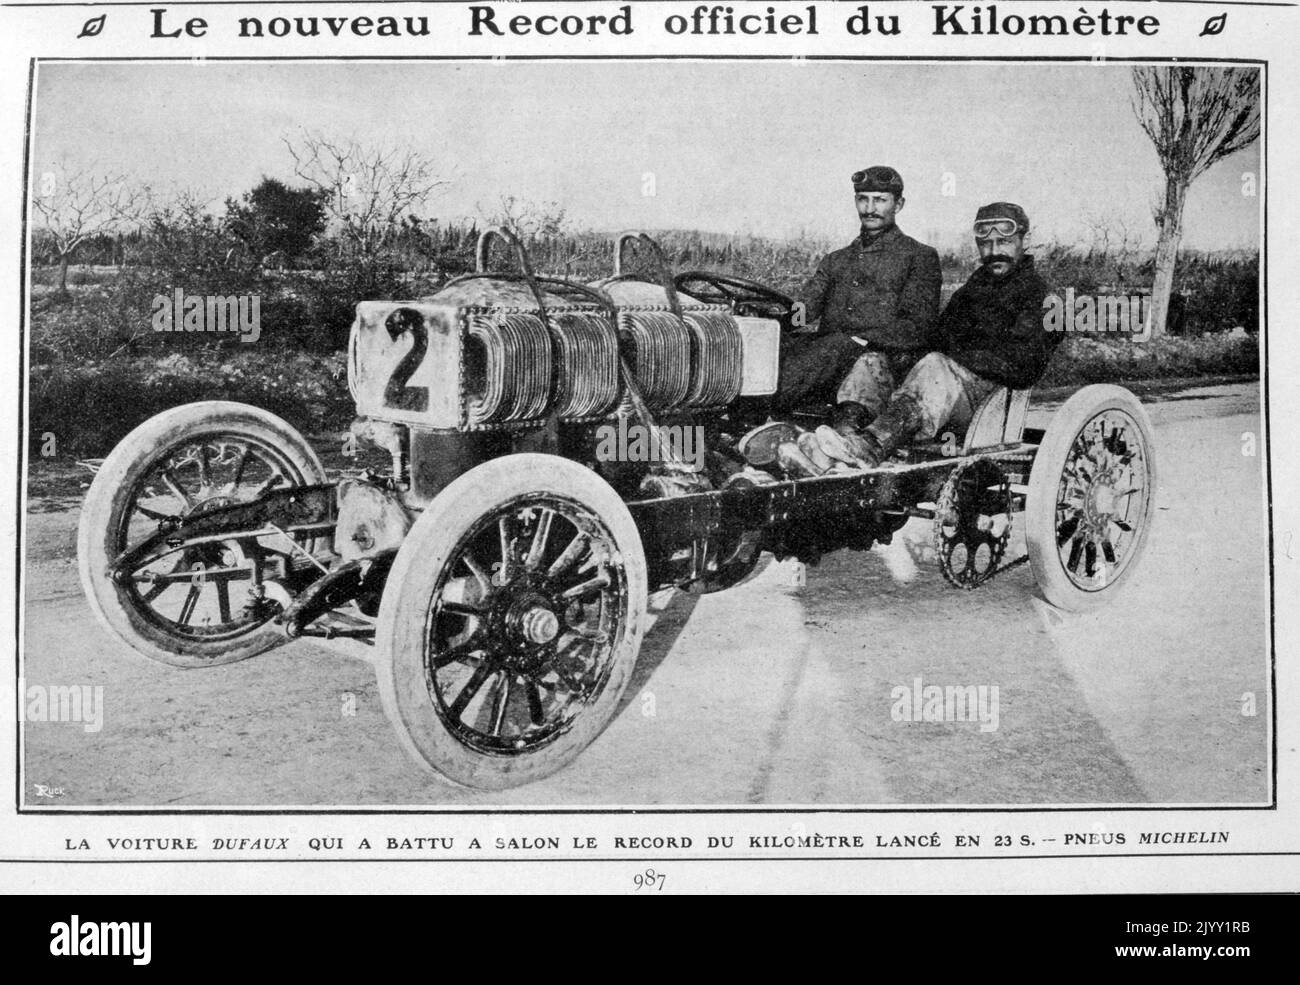 Dufaux was a Swiss car manufacturer established Geneva in 1904 by Charles and Frederic Dufaux. four-cylinder engine with 26,400 cc. This big engine gave more than 150 bhp (110 kW). Frederic Dufaux broke with this car the world record on 13 November 1905 at a speed of 98 mph (158 km/h). He completed a kilometer in just 23 seconds. Stock Photo